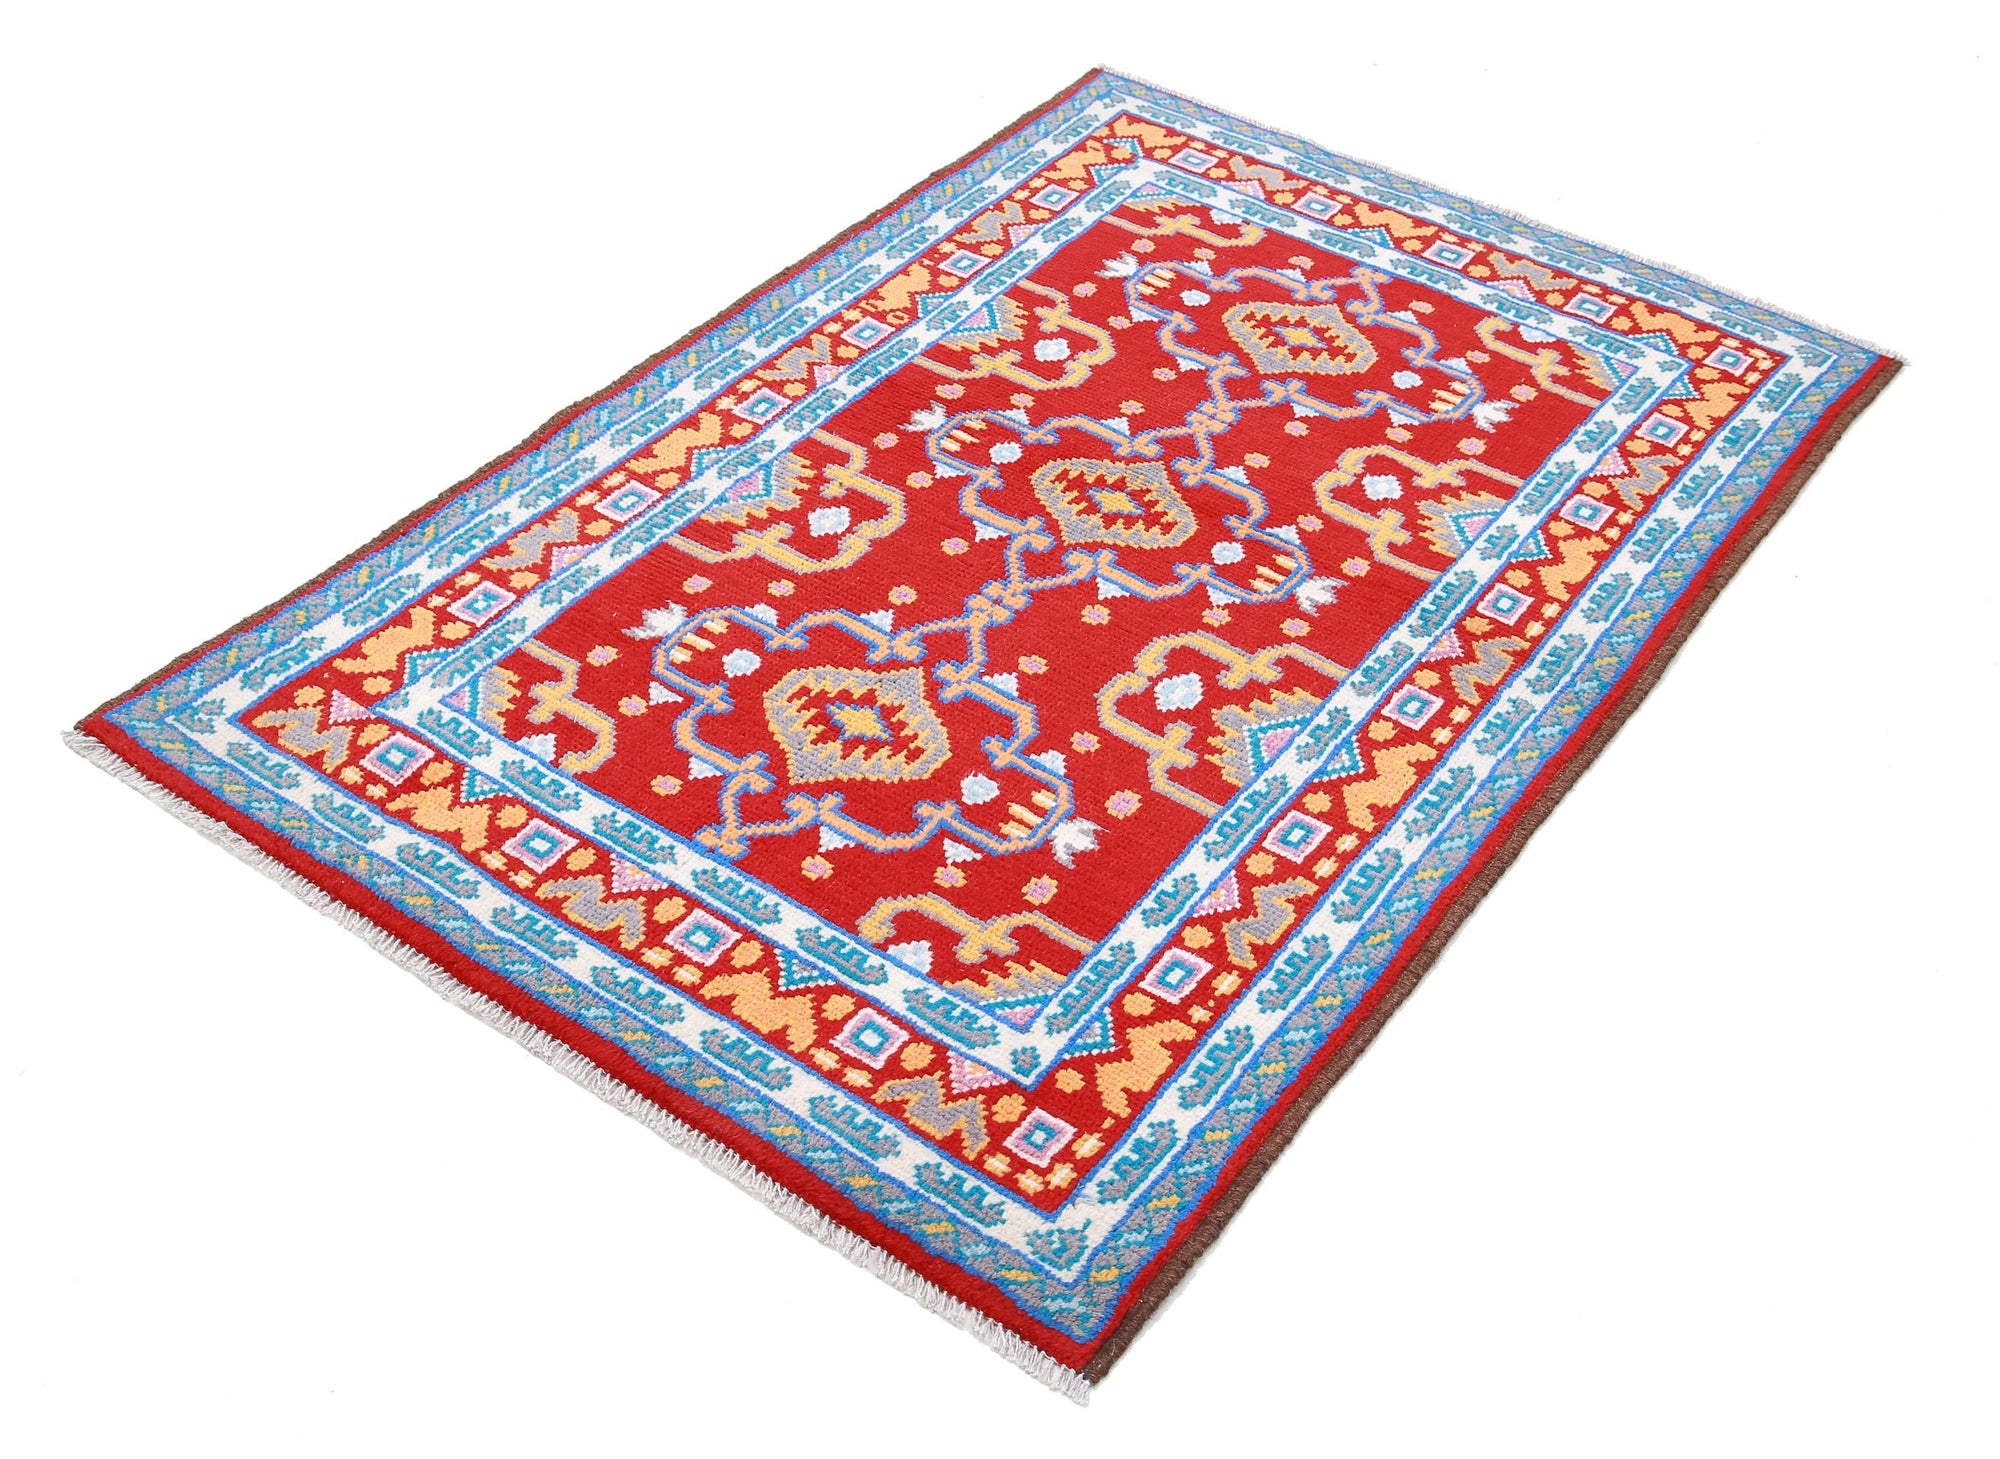 Revival-hand-knotted-qarghani-wool-rug-5014209-2.jpg